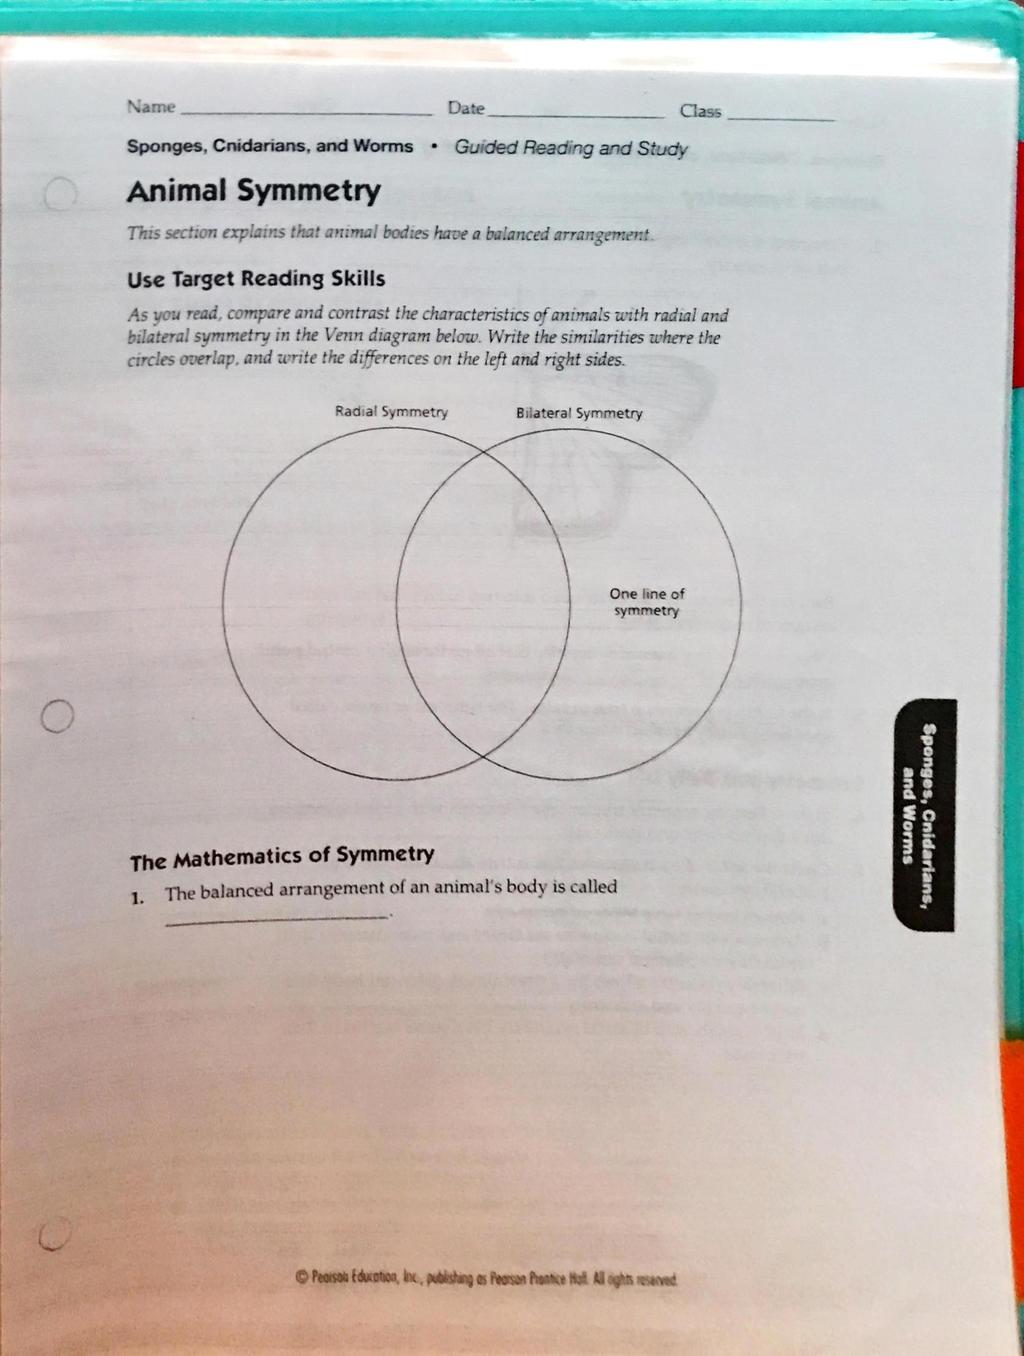 Name Date Animal Symmetry This sect:on explains that an:mal bodæs have a bilanced arrangemene Use Target Reading Skills As you read, compare and contrast the characteristics ofanimals With radul and